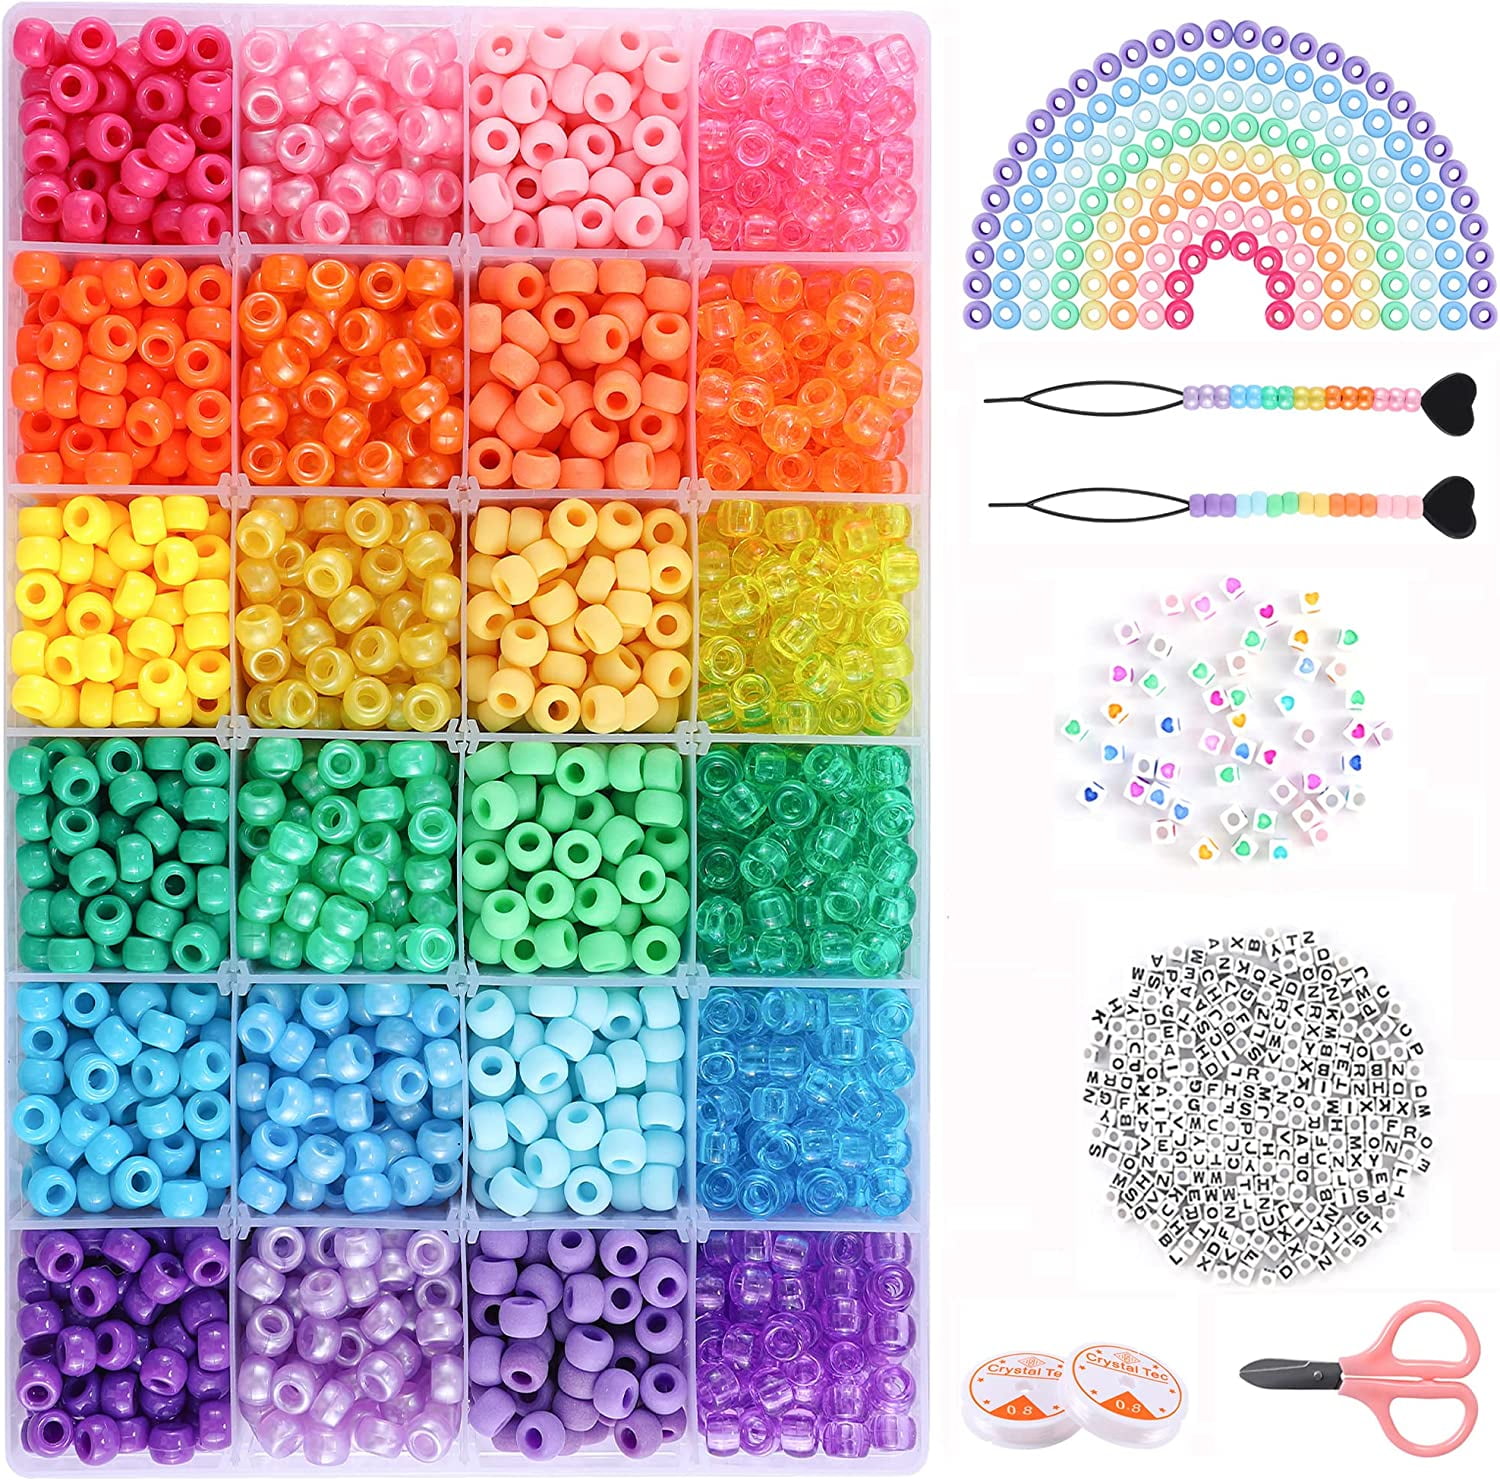 Praisebank 1000 Candy Color Pony Beads, Beads for Crafts, Hair Beads, Beads for Jewelry Making, Beads for Hair Braids